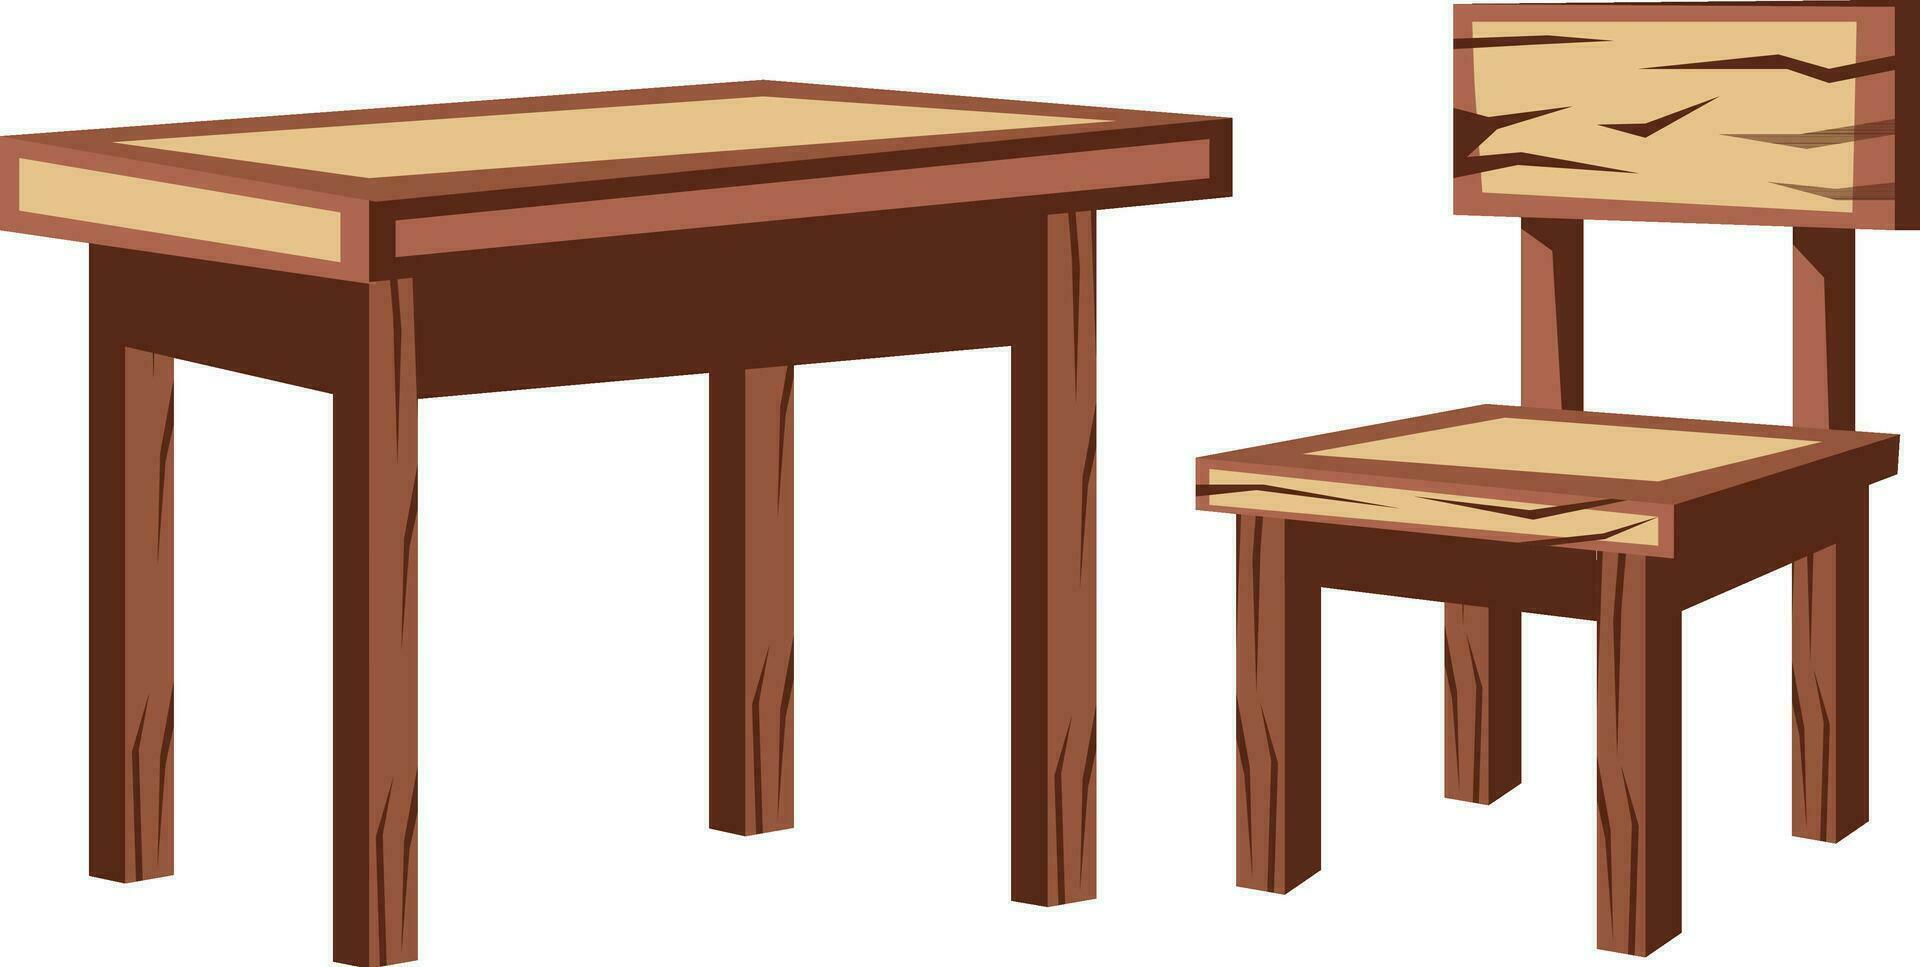 wooden table and chair on white background vector illustartion design